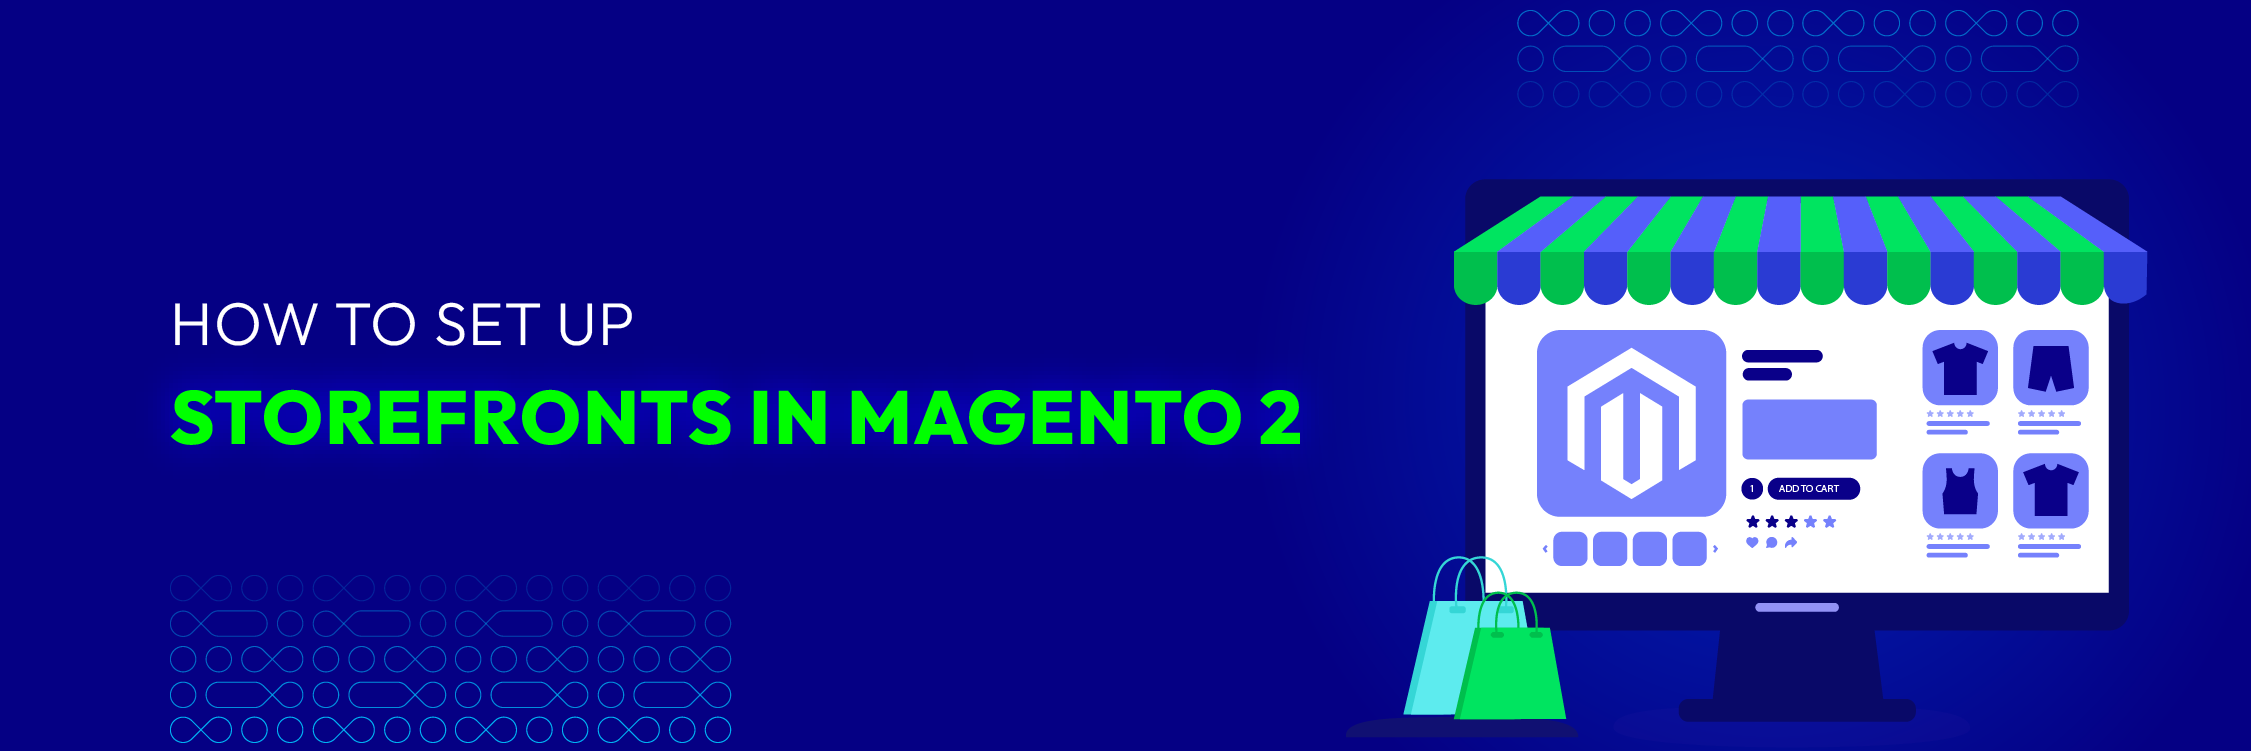 How to Set up Storefronts in Magento 2